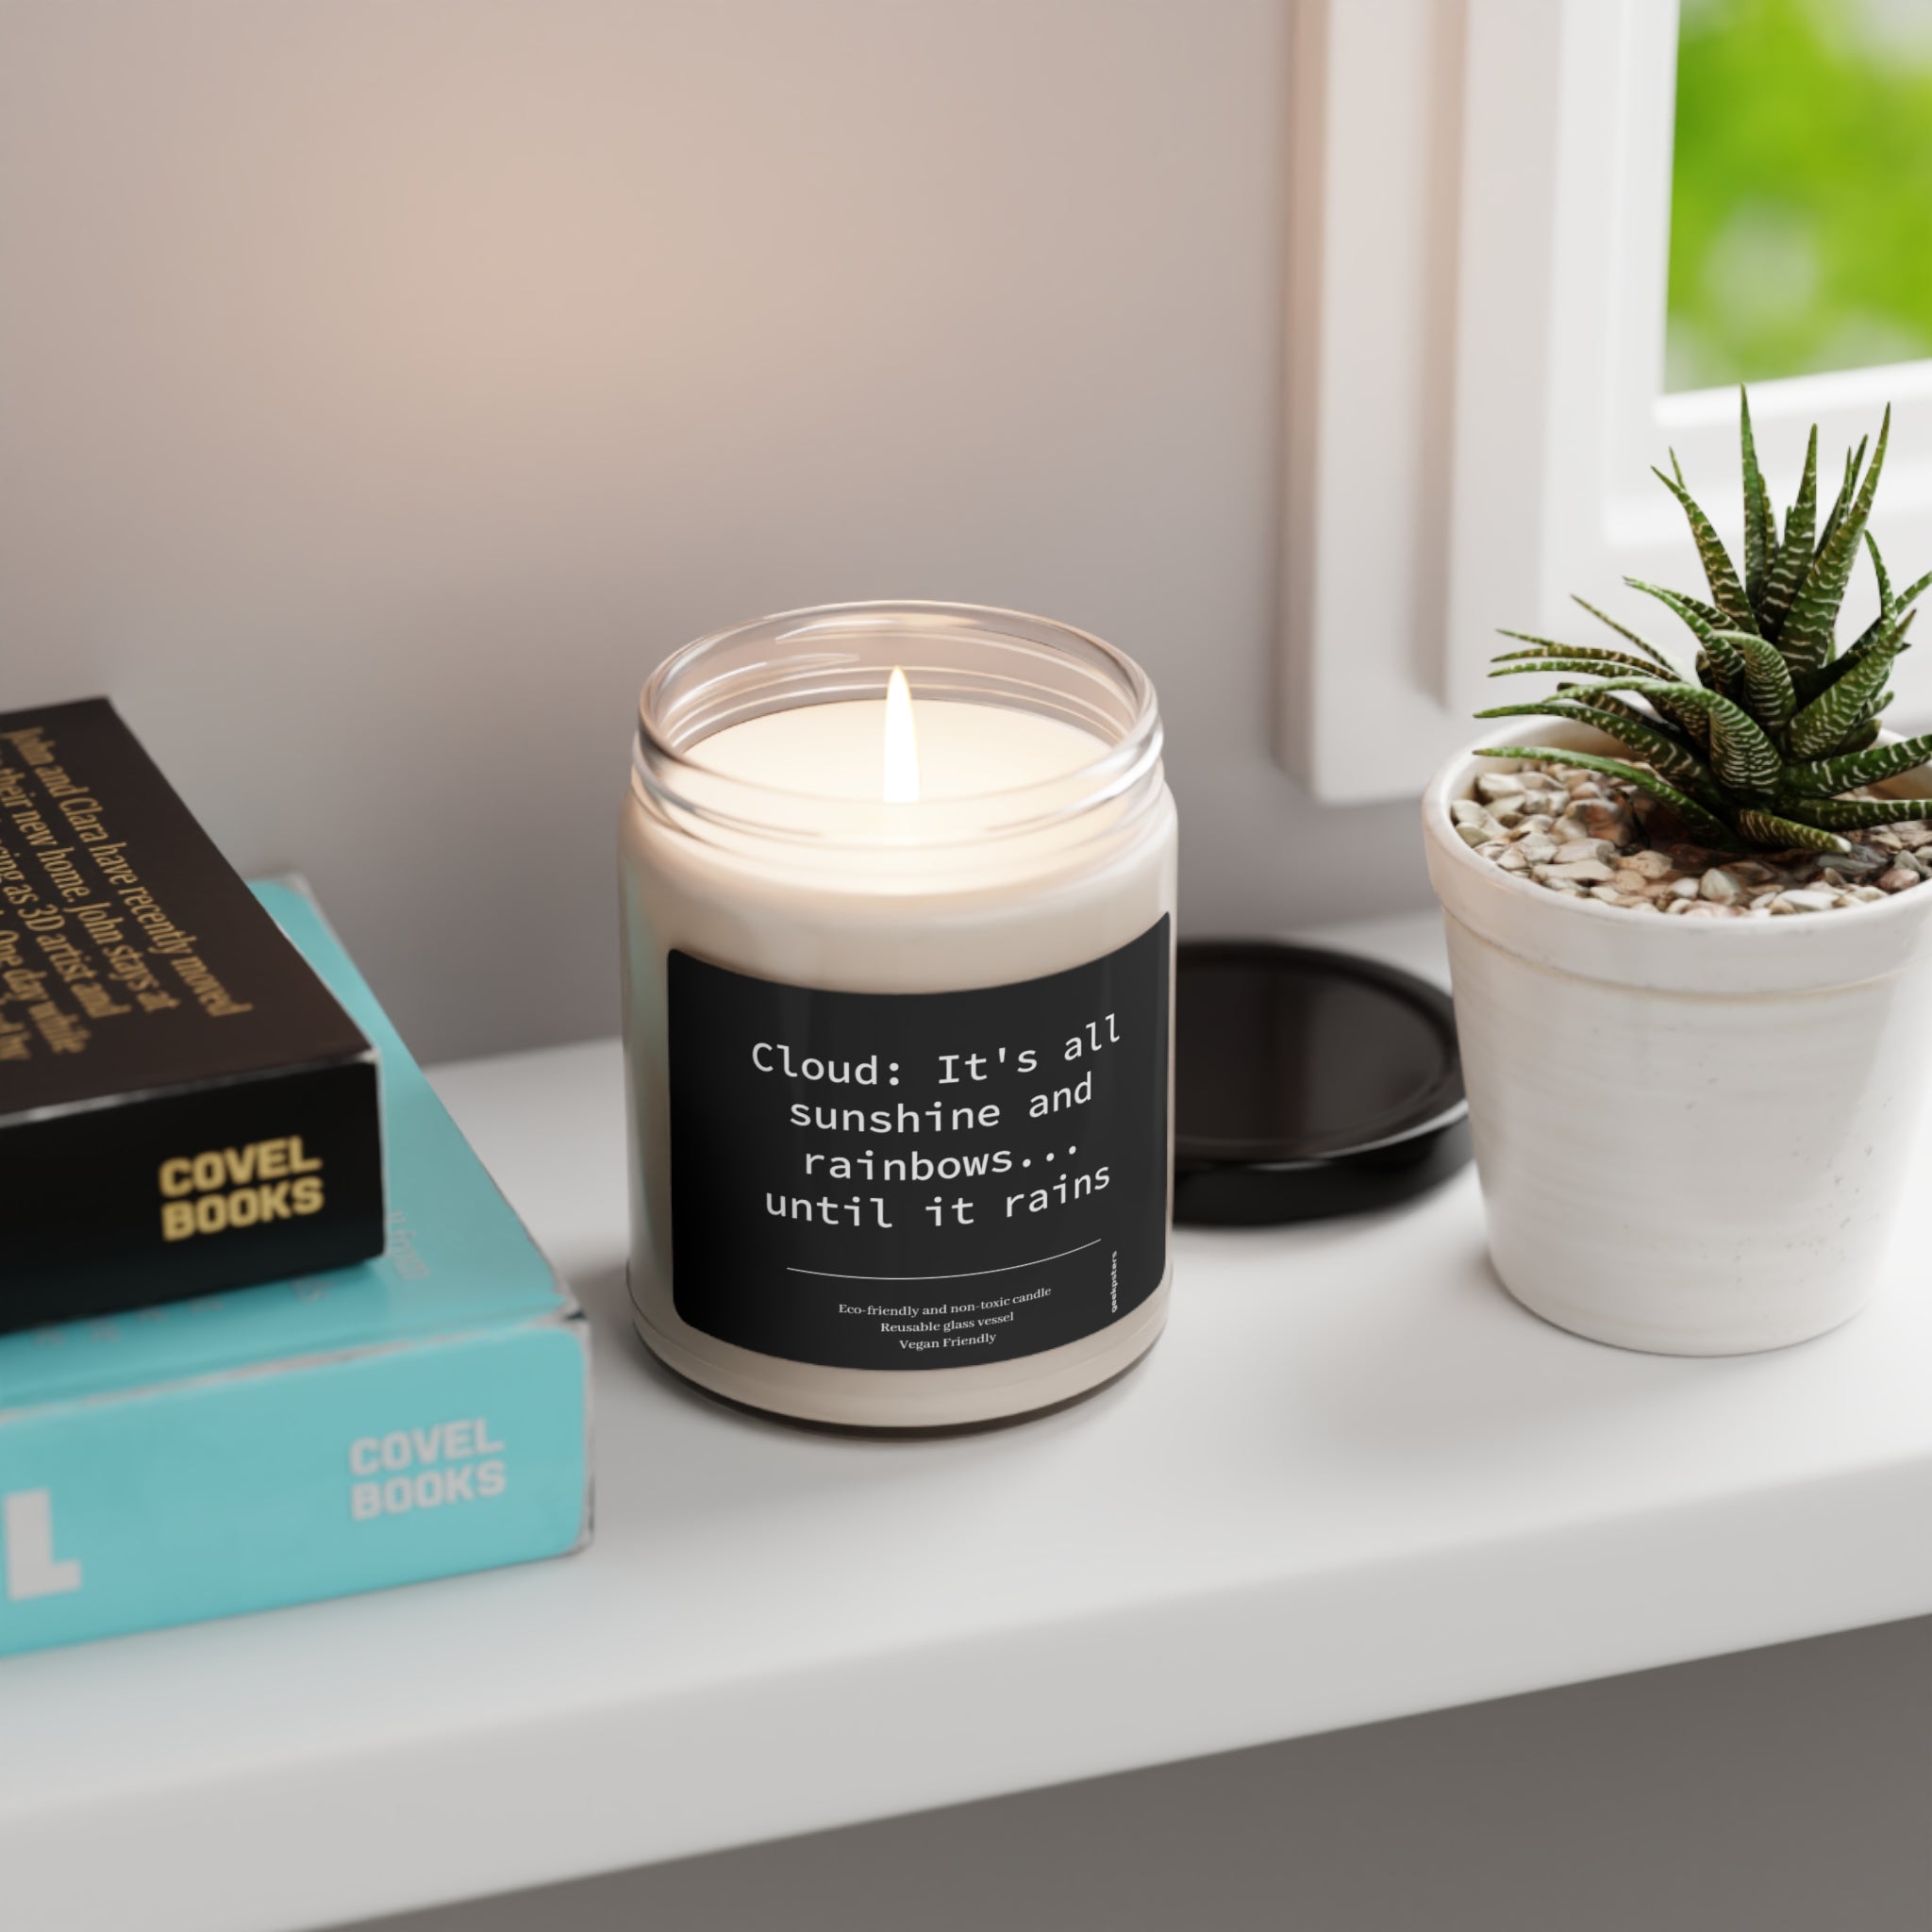 A Cloud: Its All Sunshine and Rainbow..until its Rain scented candle with a humorous quote beside a potted plant on a windowsill.